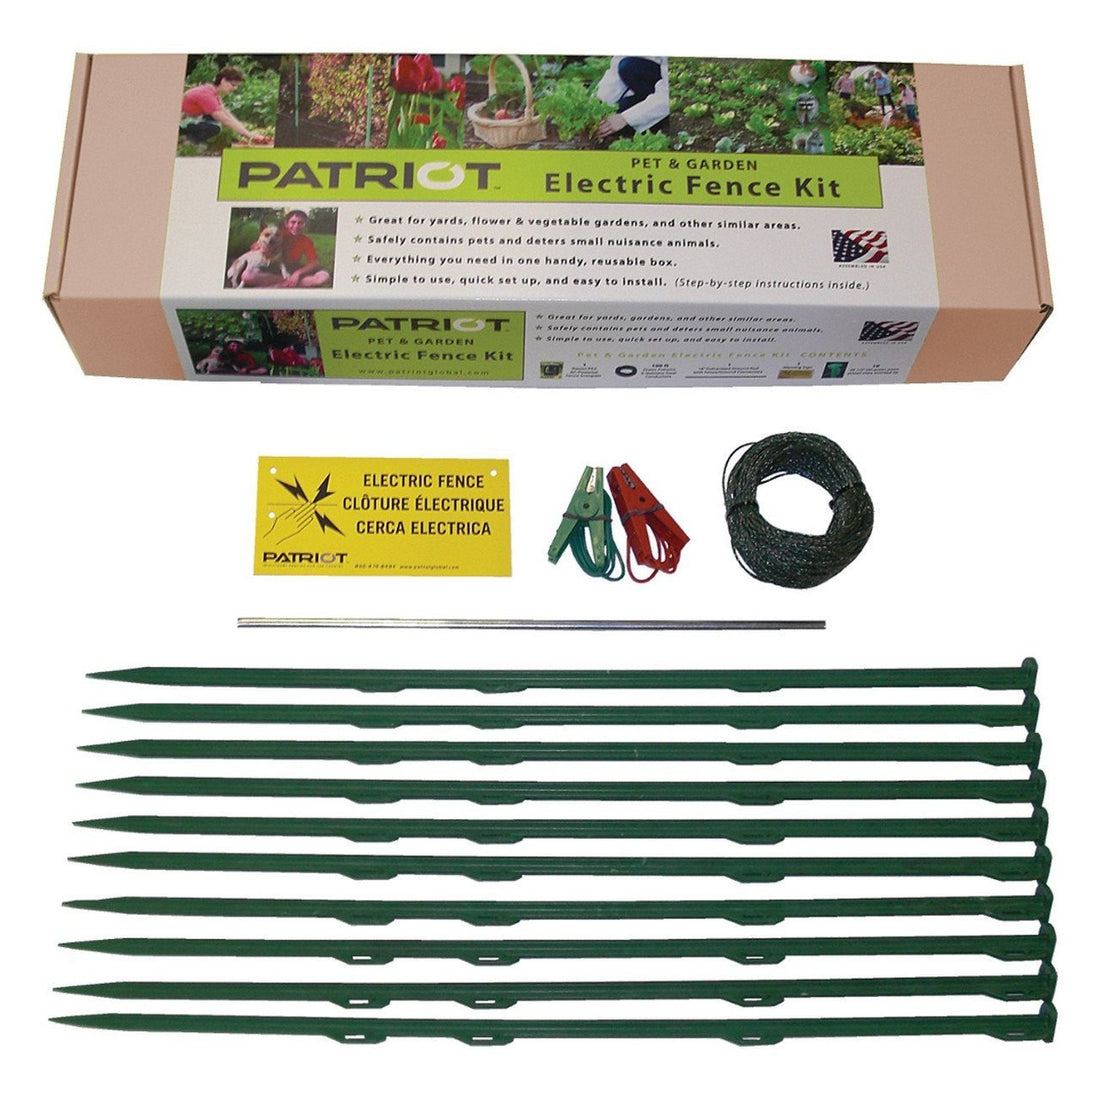 Patriot Pet and Garden Electric Fence Accesory Kit